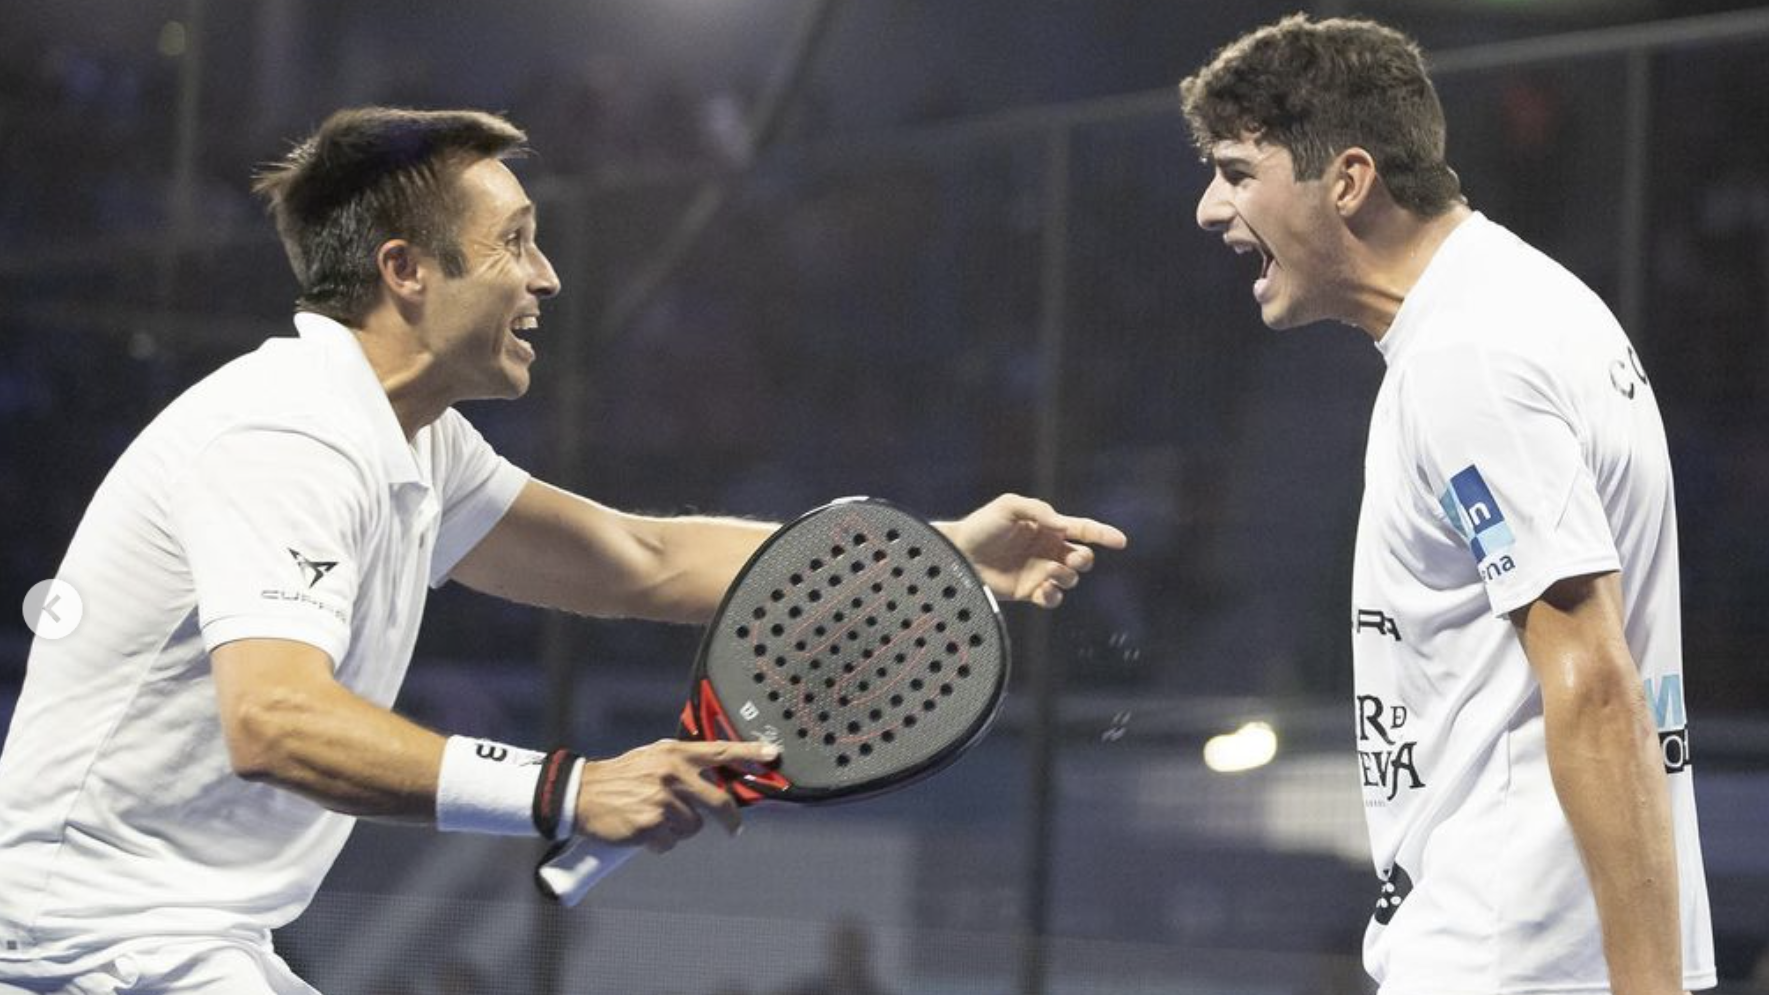 Belasteguin and Coello: 23 years separate them